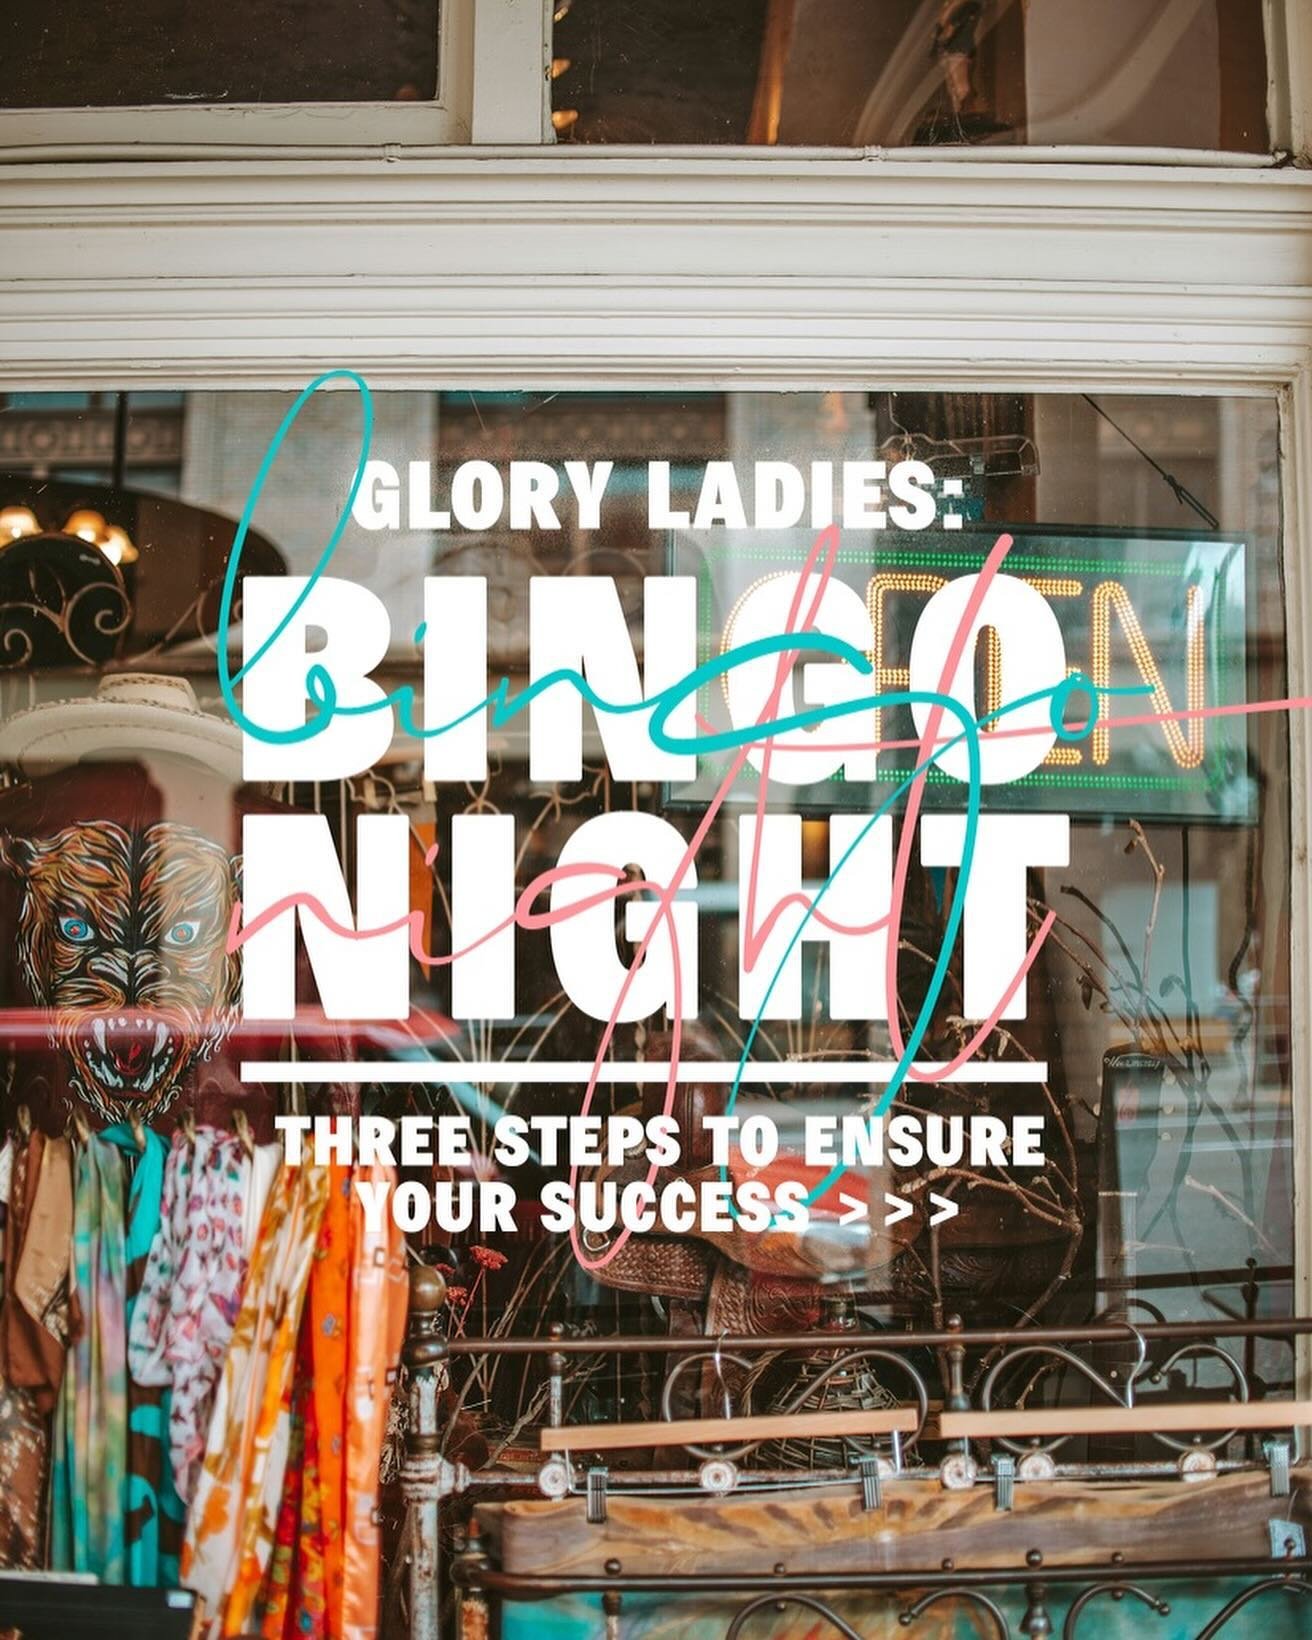 FRIDAY NIGHT IS LADIES NIGHT! 
We&rsquo;re doing BINGO and doing it UP by asking you to bring your best bingo ego! 😉 💃🏻 

WHEN: Friday, April 19th @ 6pm 
WHERE: 3124 Troost Ave.
WHO: you! and all our glory gals 

RSVP by texting &ldquo;WOMEN&rdquo